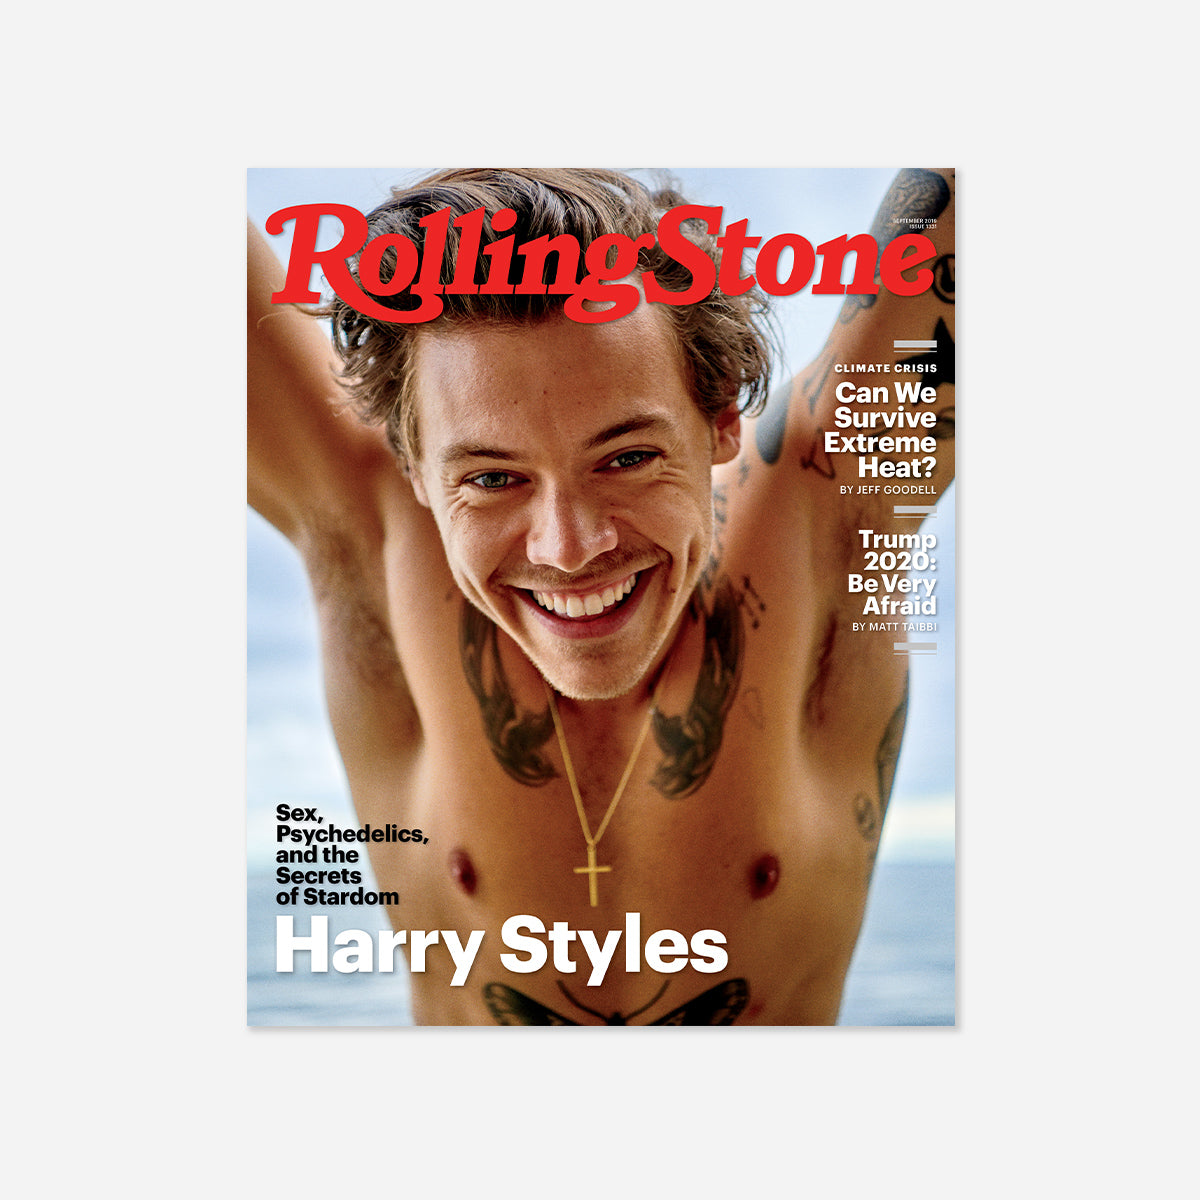 Rolling Stone June 2021 Special Collector's Box Set featuring BTS - Rolling  Stone Shop